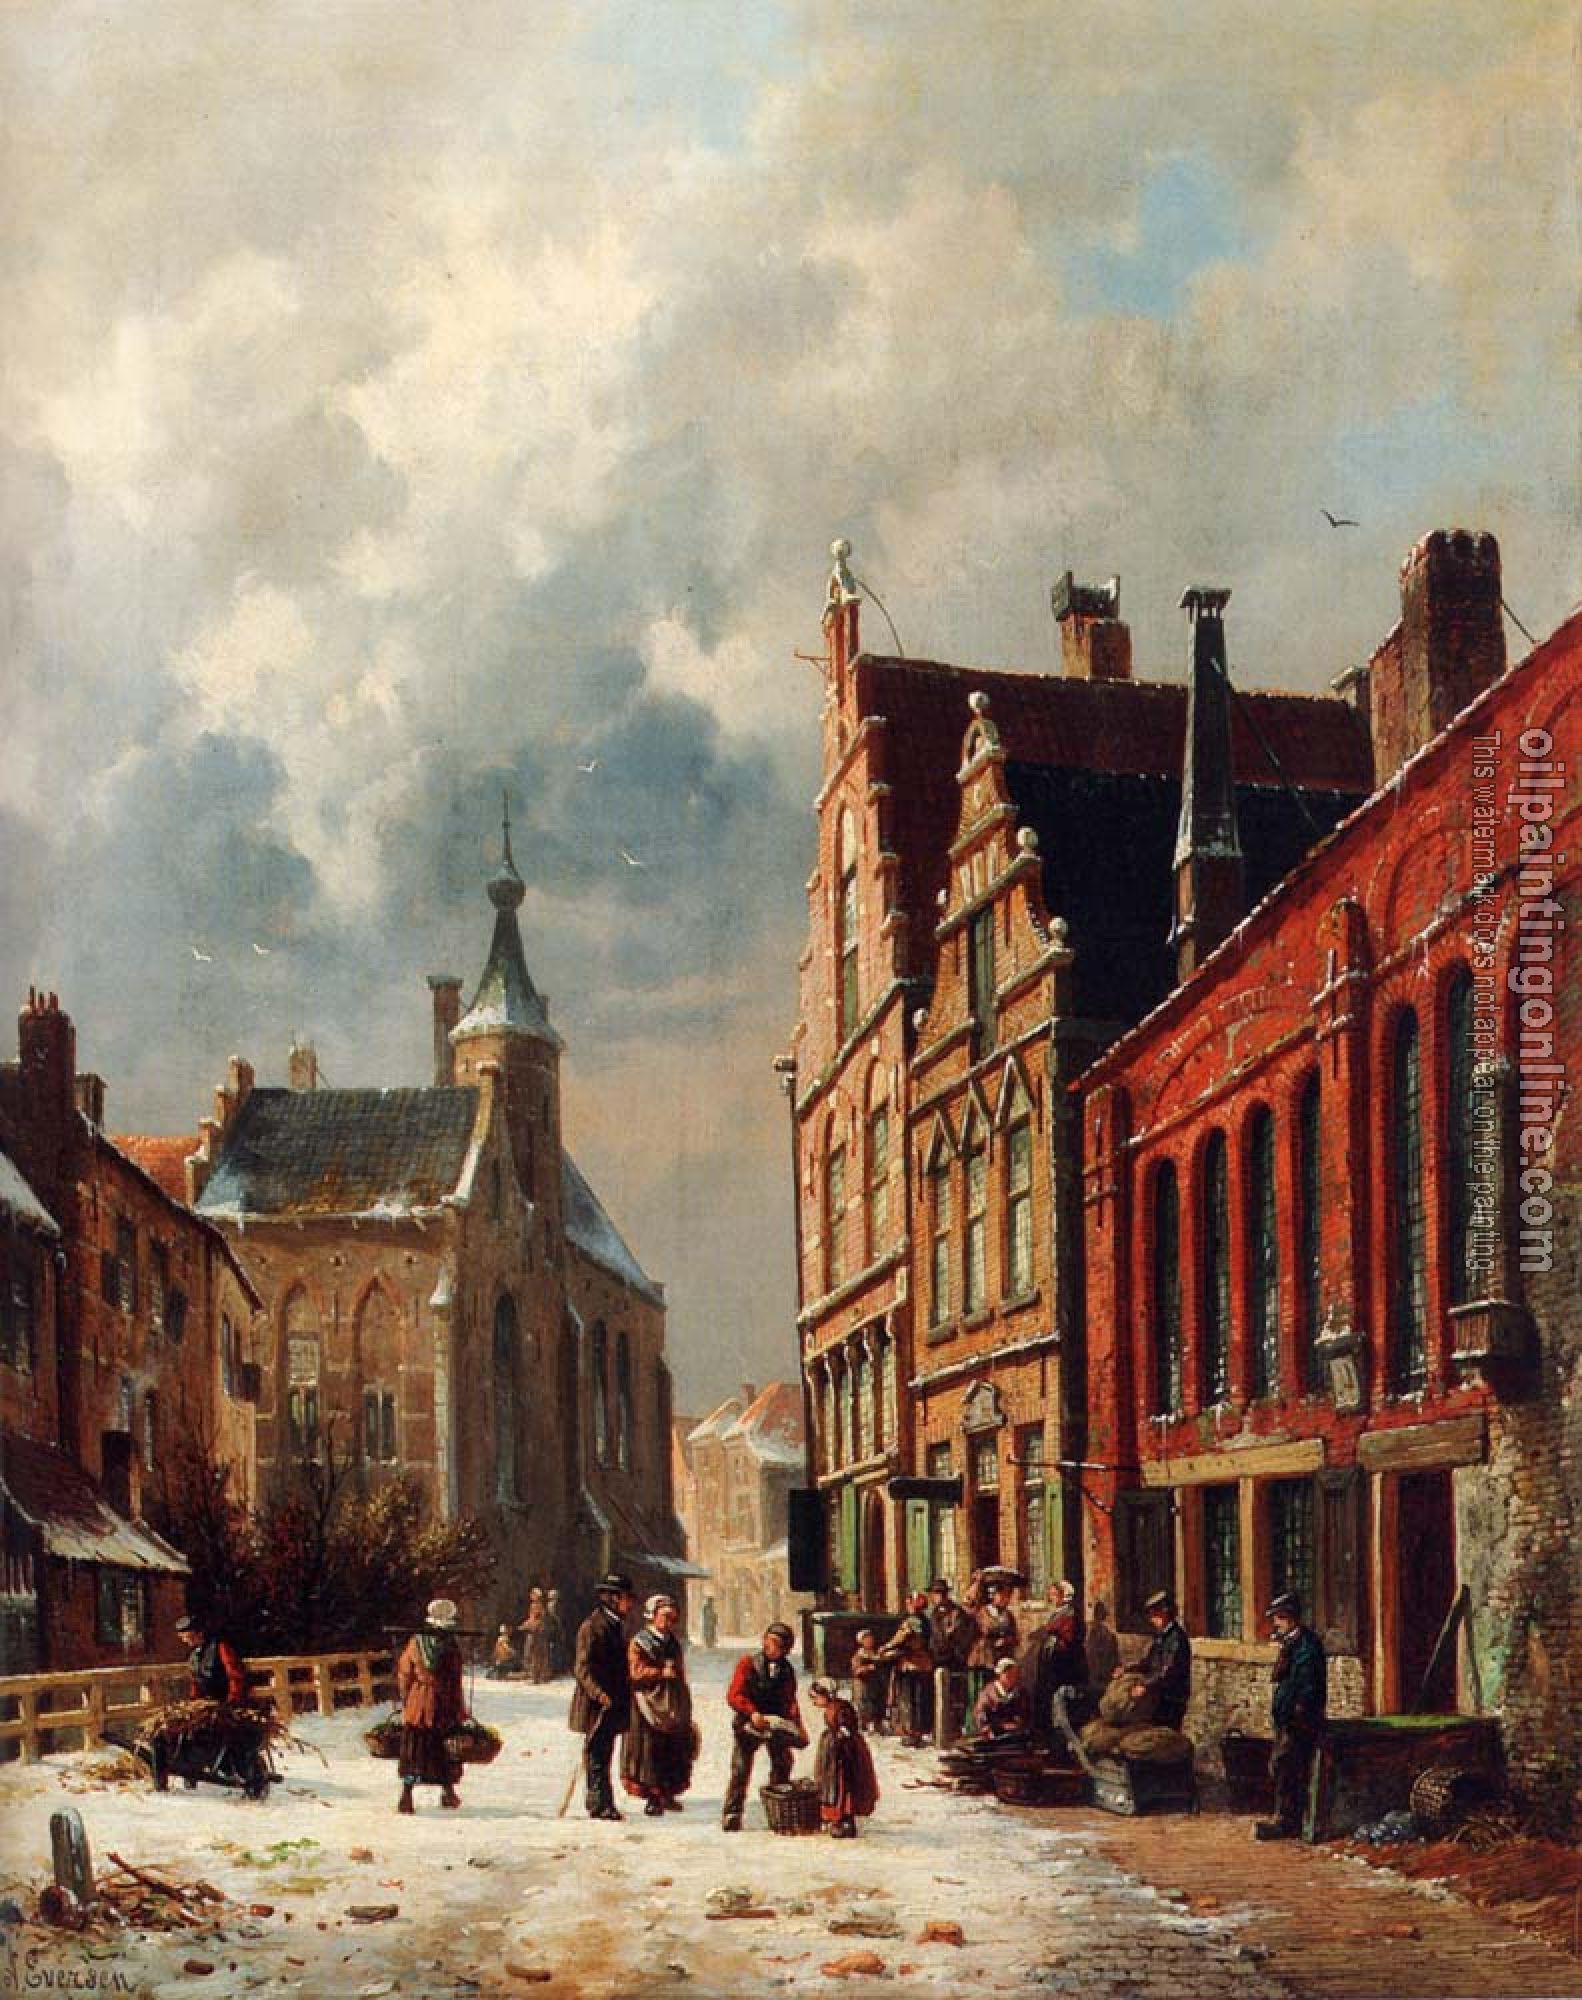 Eversen, Adrianus - A View In A Town In Winter